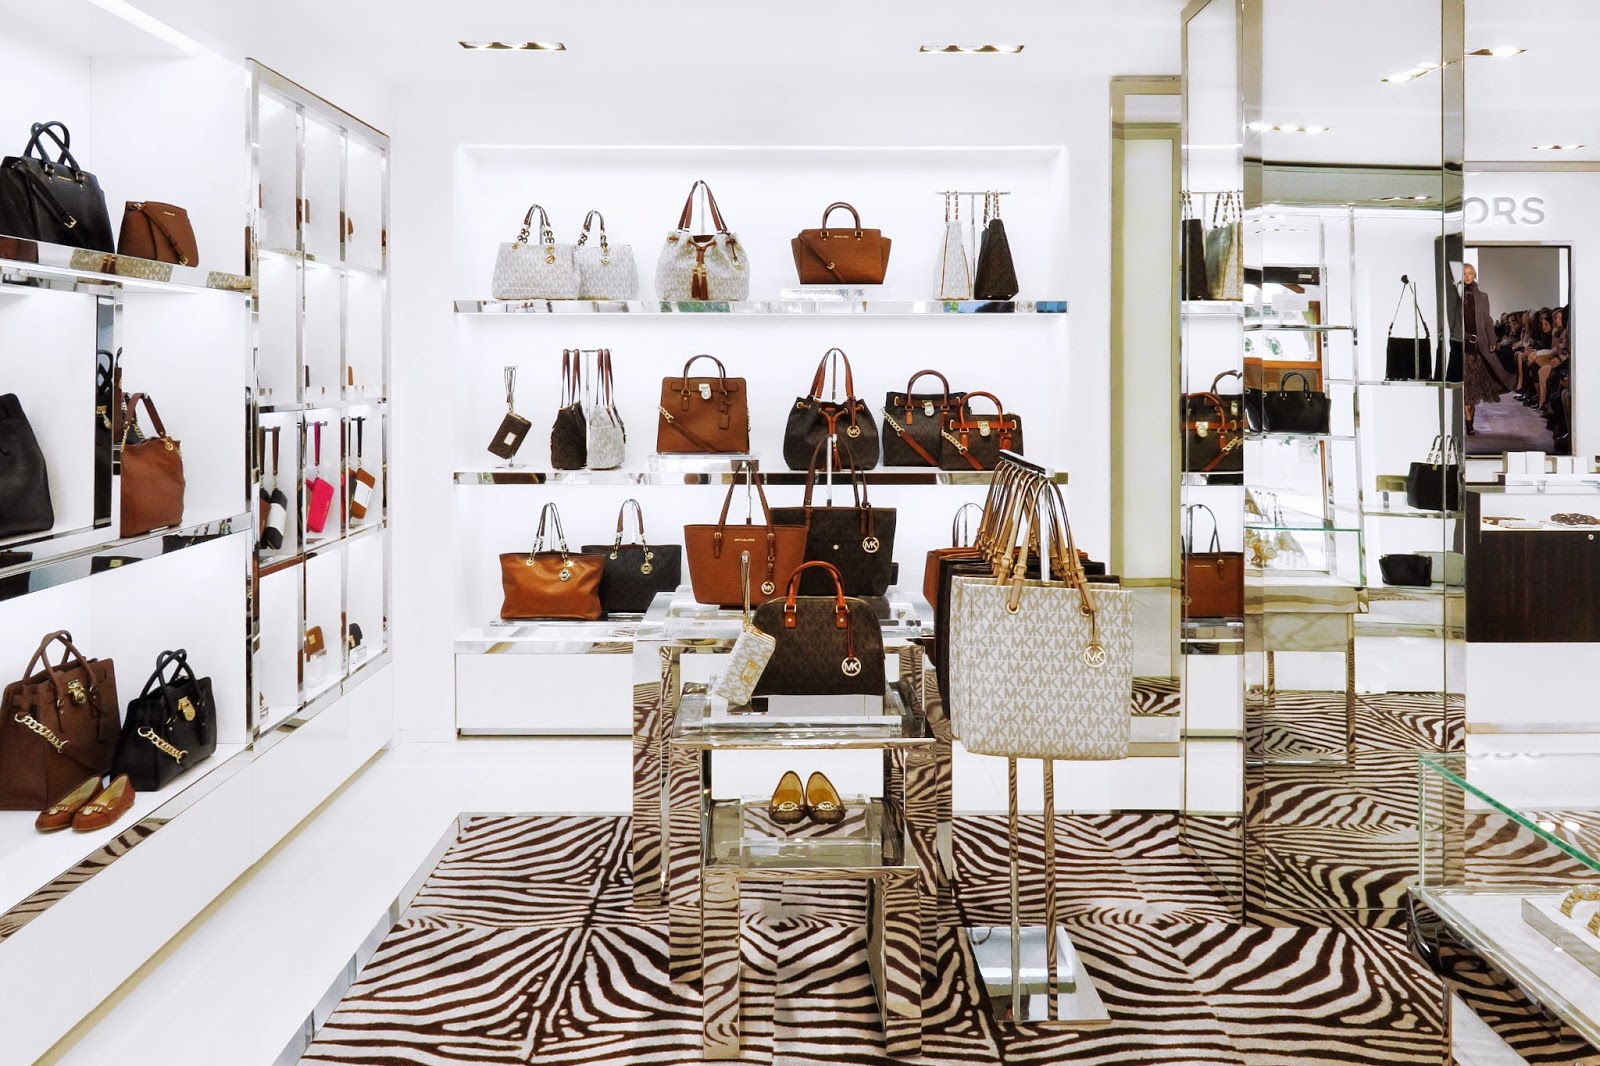 MICHAEL KORS OPENS ITS FIRST STORE IN BEIRUT, LEBANON‏ | The Vanity